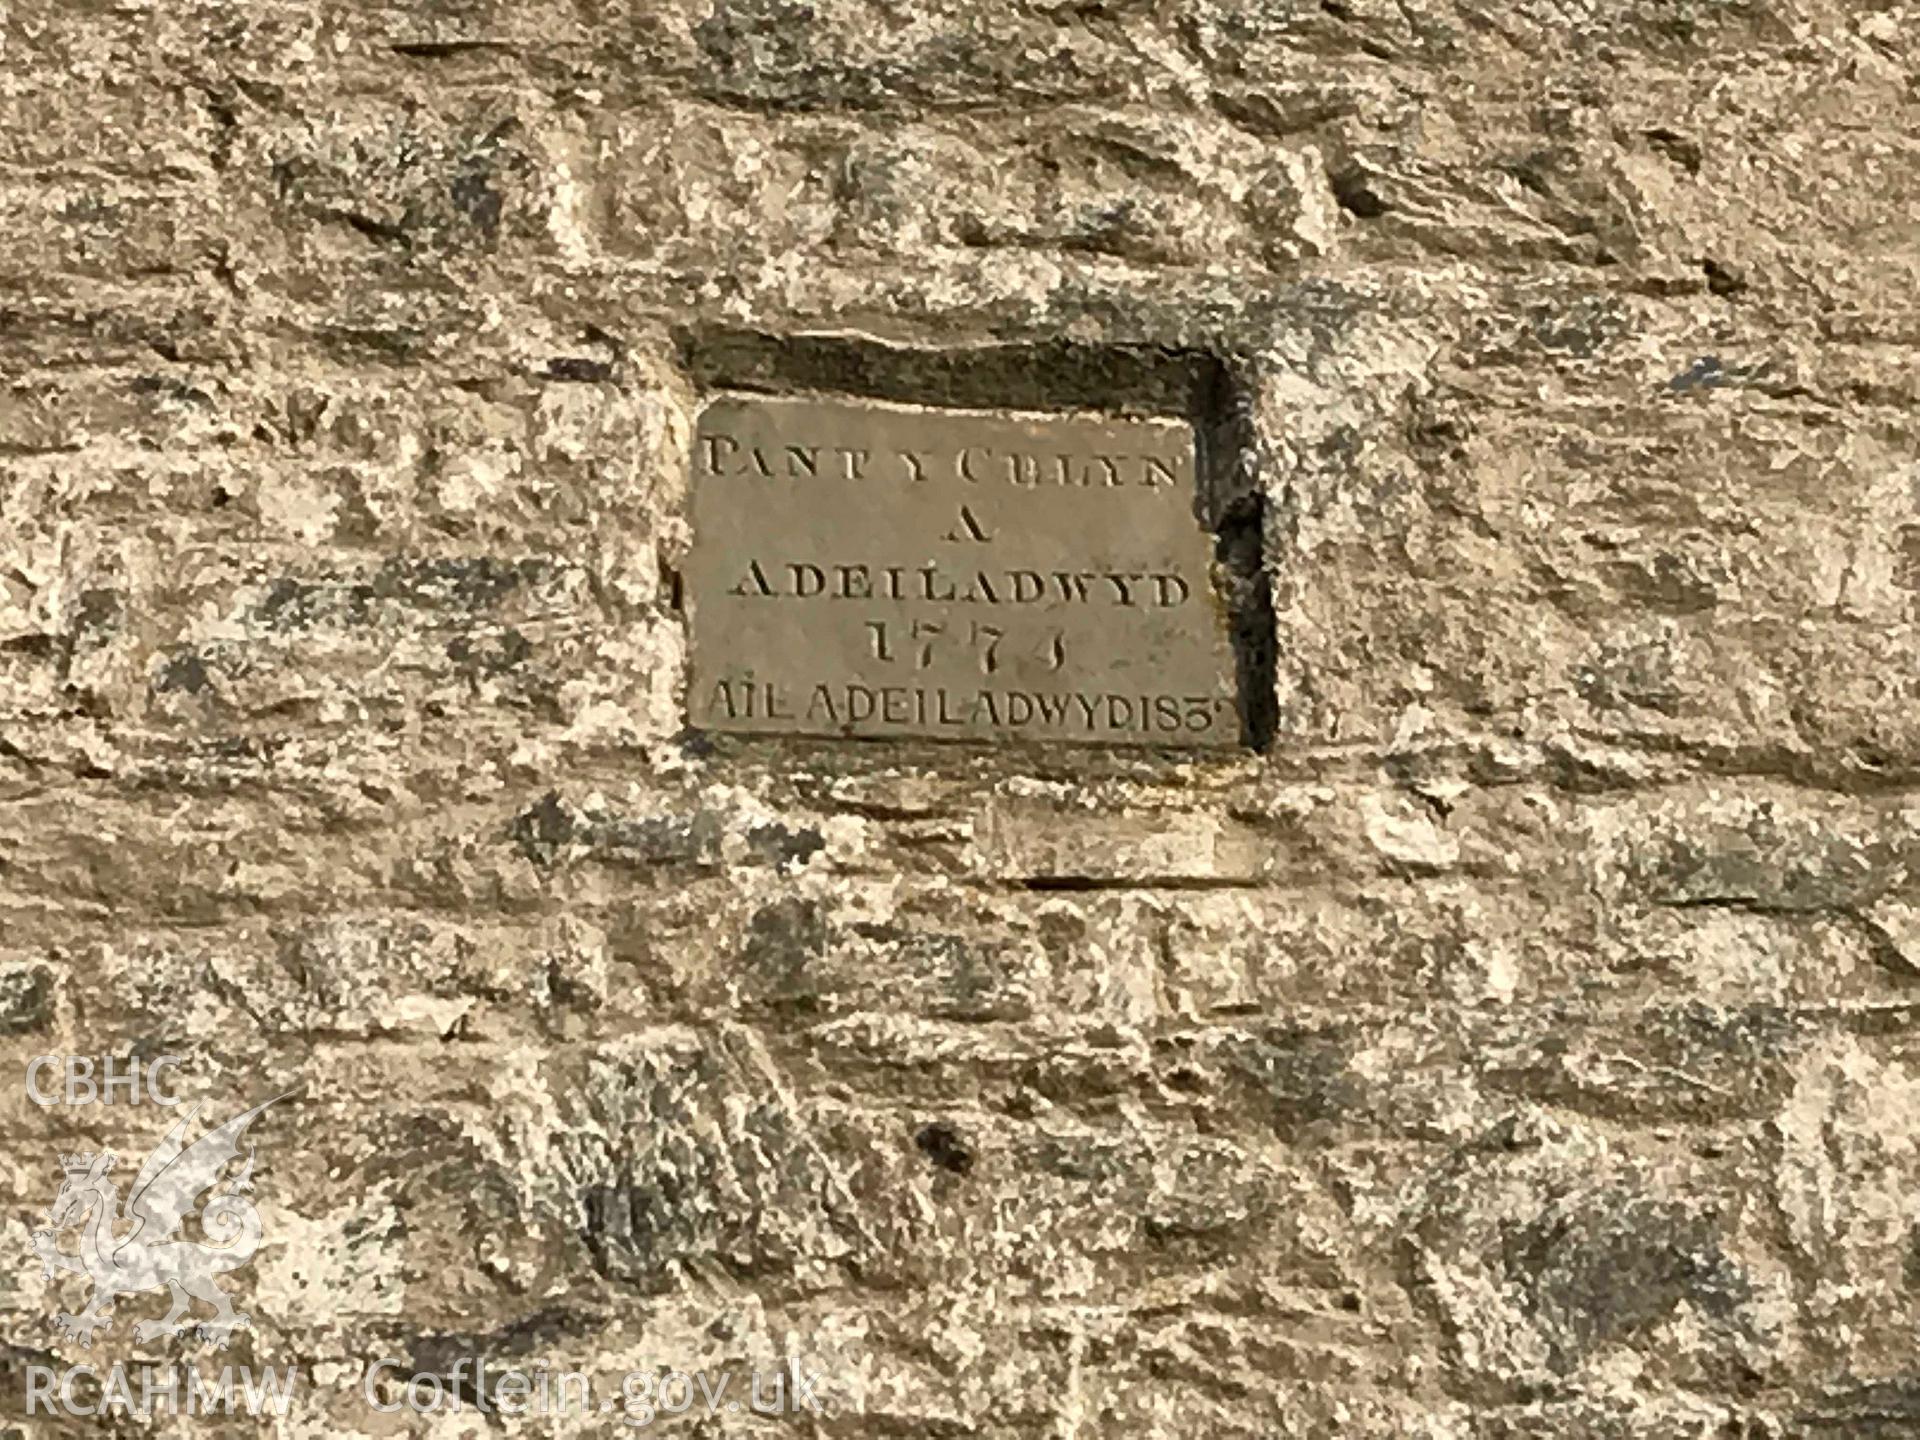 Detailed view of plaque on the exterior of Seion Welsh Baptist chapel, Pantycelyn, Treflys. Colour photograph taken by Paul R. Davis on 17th November 2018. Transcript: PANT Y CELYN A ADEILADWYD 1774 AIL ADEILADWYD 1832